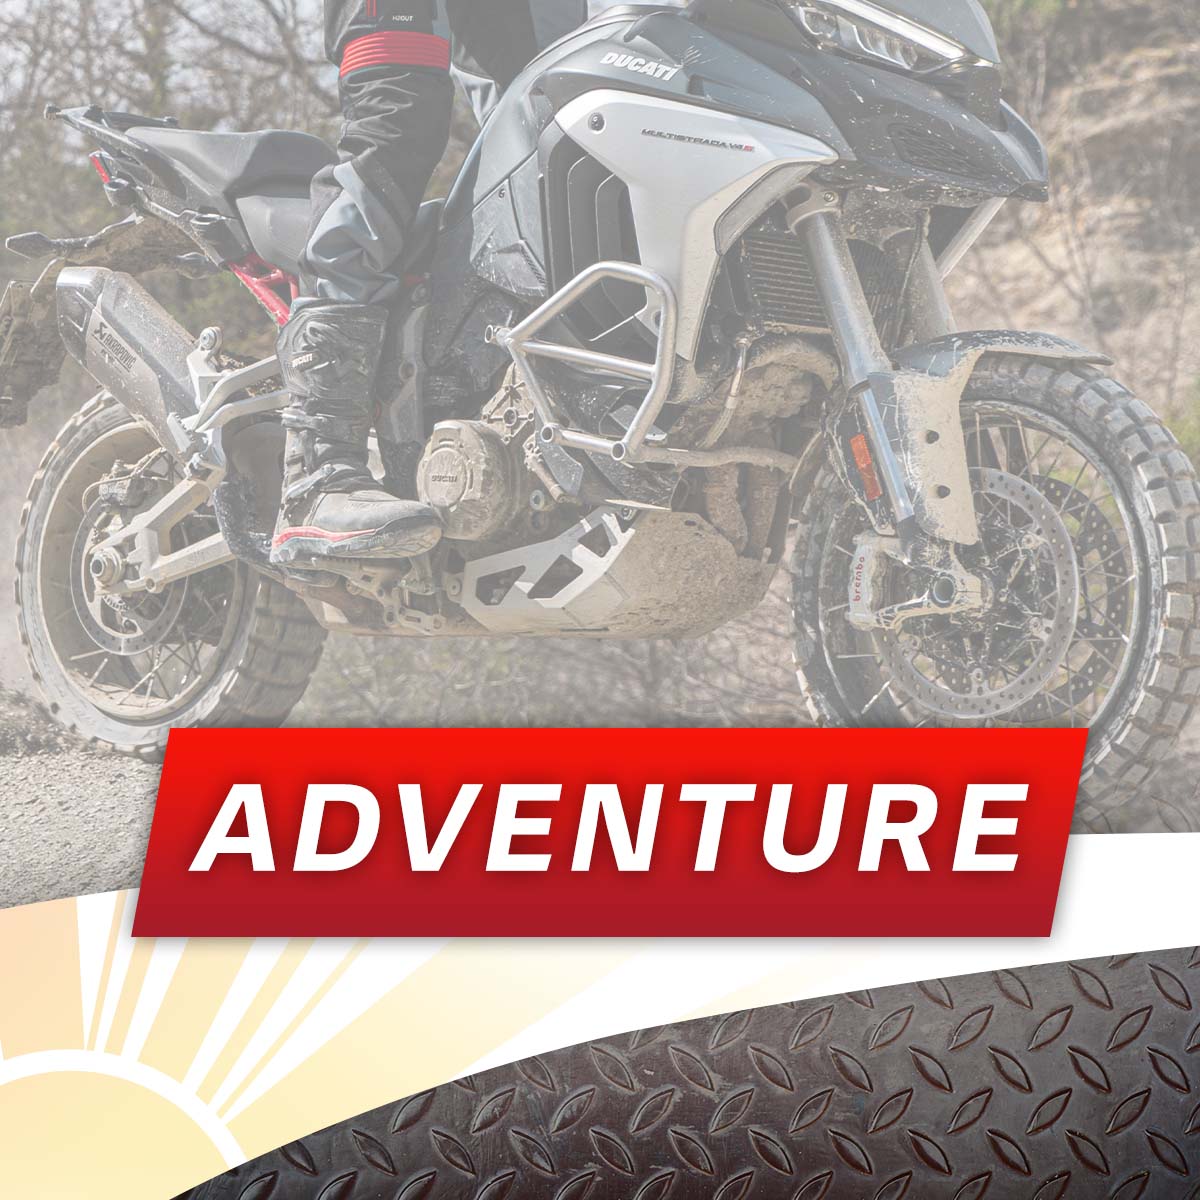 Join us at our Laguna Ducati Summer Celebration Event on Saturday 30th July and enter our Adventure category in our Ducati bike competition!